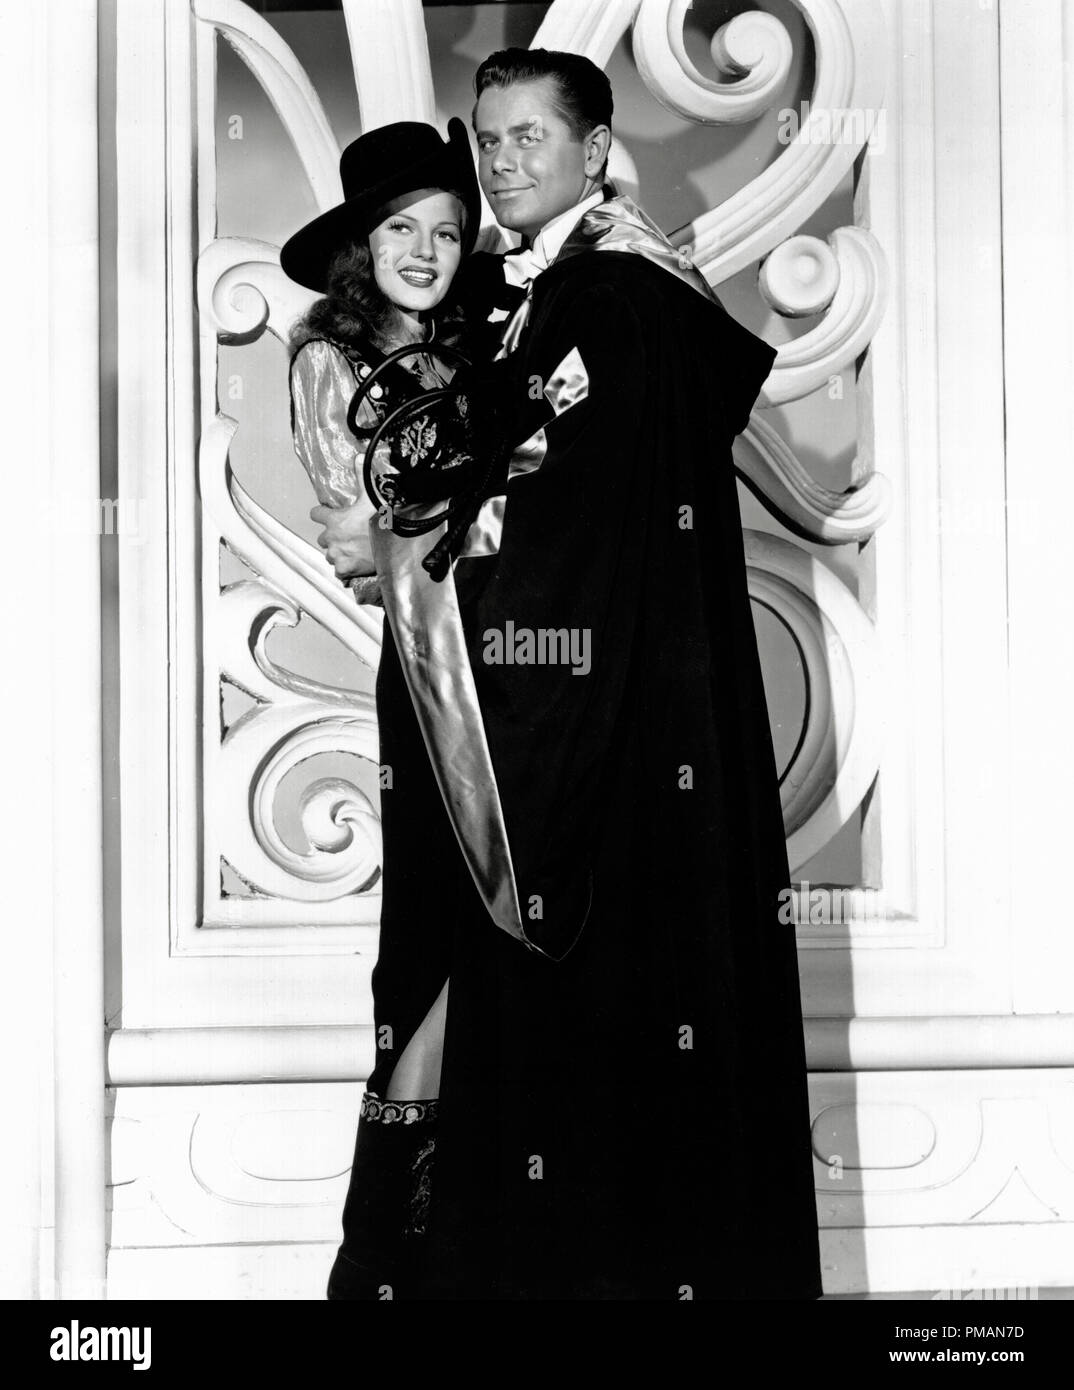 Film Still/Publicity Still of 'Gilda' Rita Hayworth, Glenn Ford 1946 Columbia / Cinema Publishers Collection - No Release - For Editorial Use Only File Reference # 33505 388THA Stock Photo